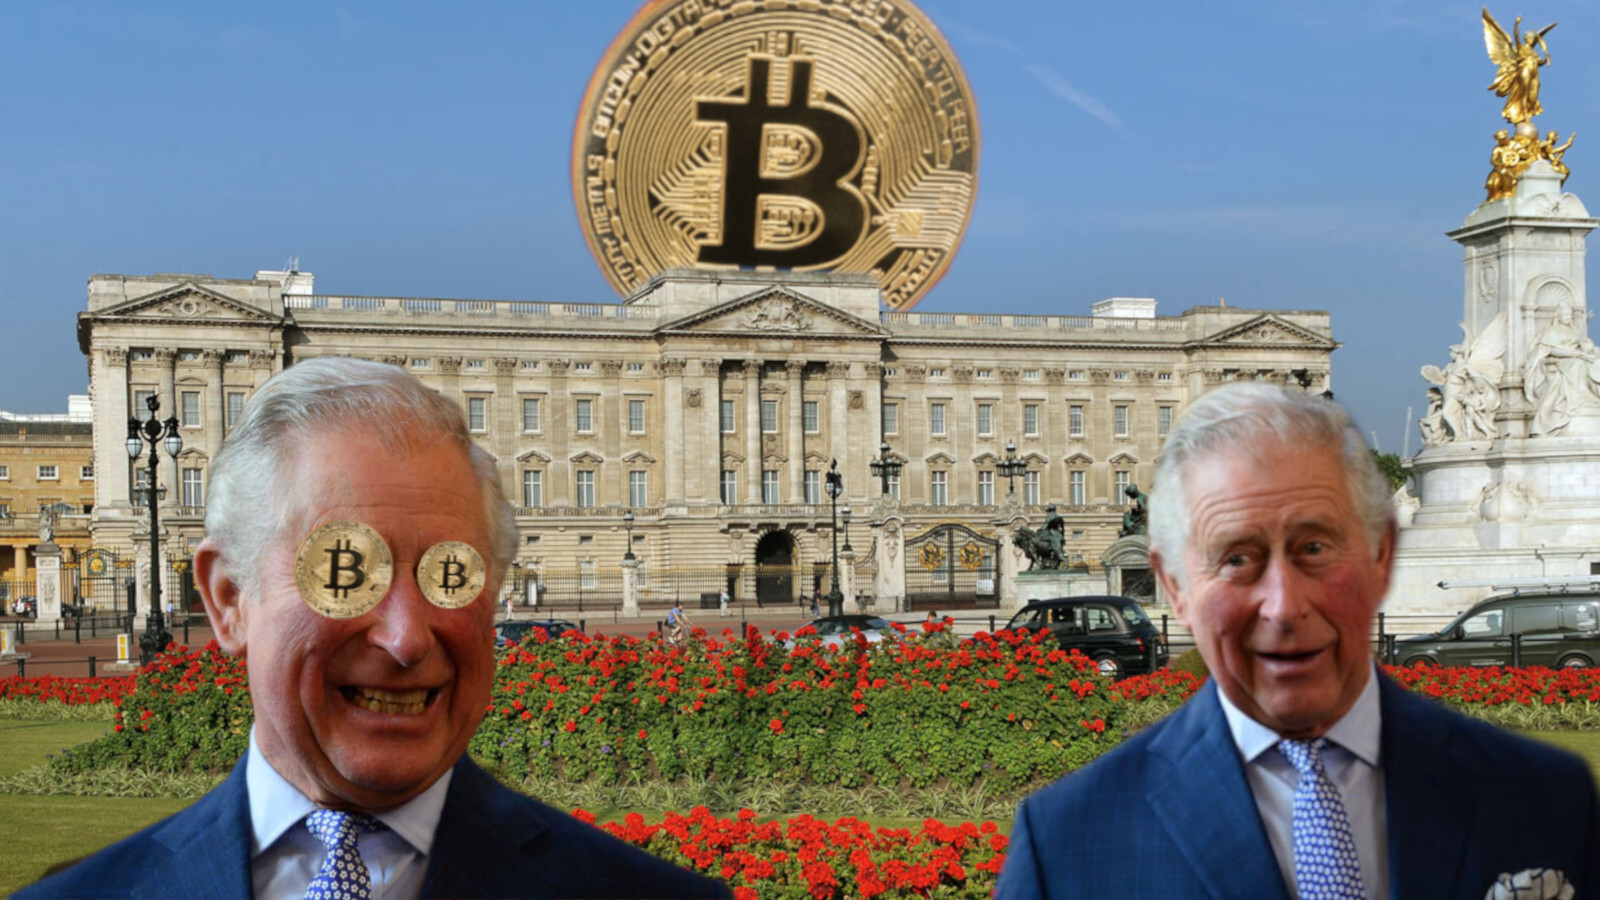 Prince Charles on Bitcoin: ‘It’s a very interesting development’